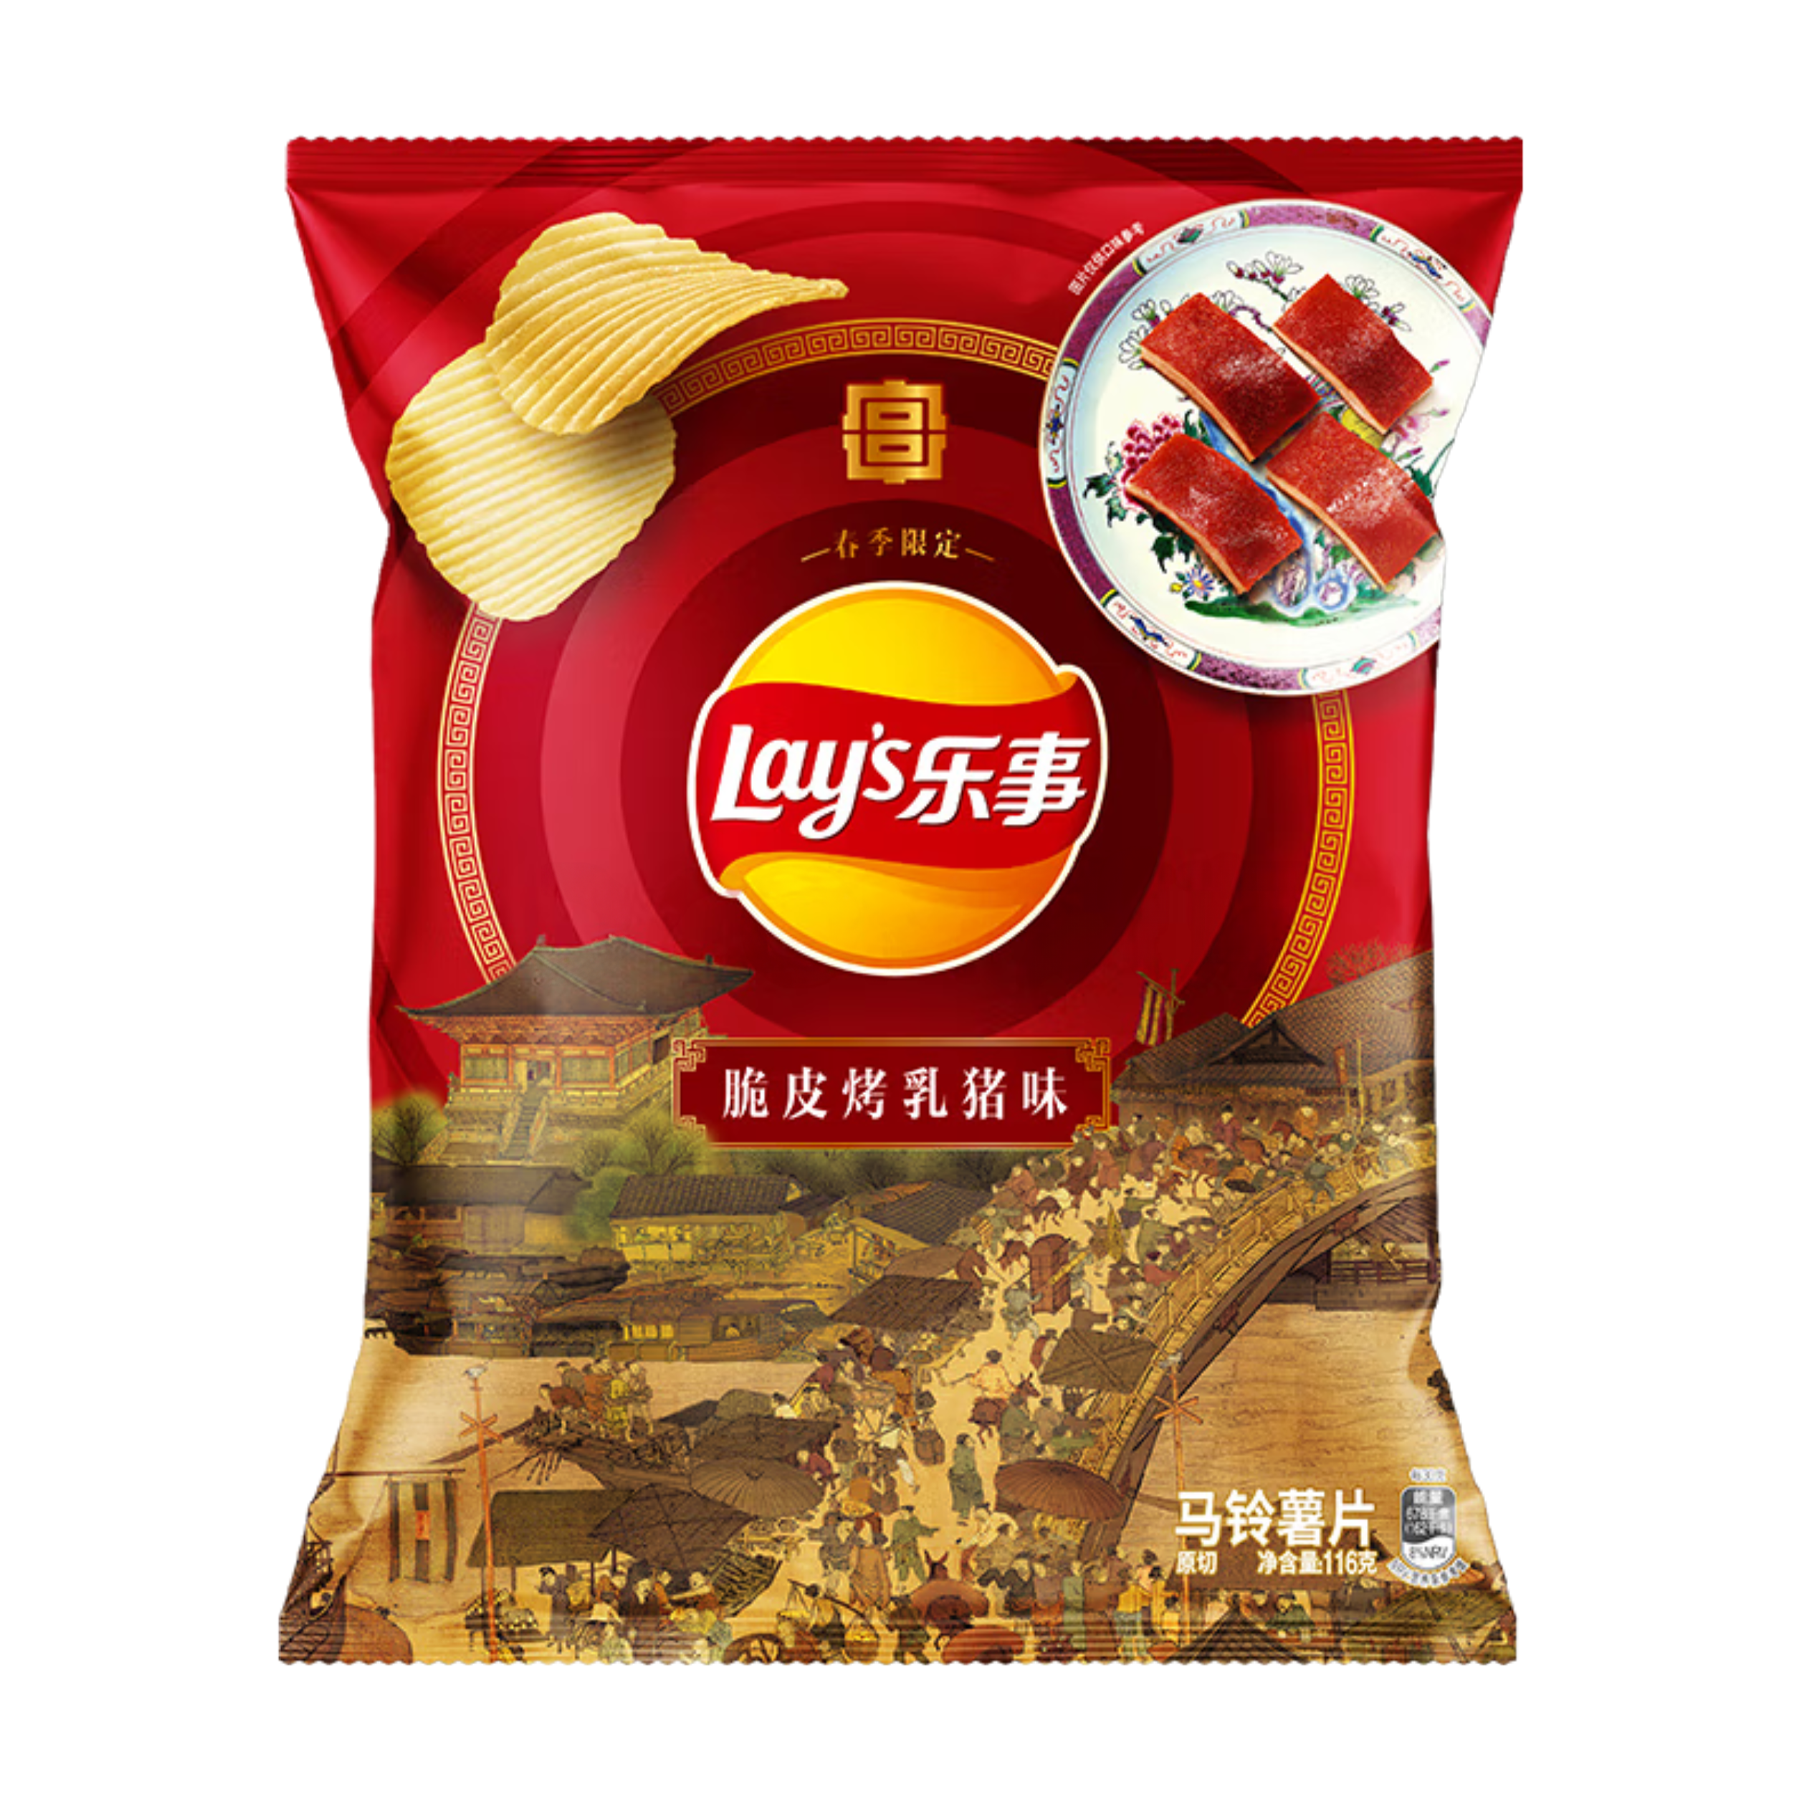 Lay's Roast Suckling Pig Flavored Chips